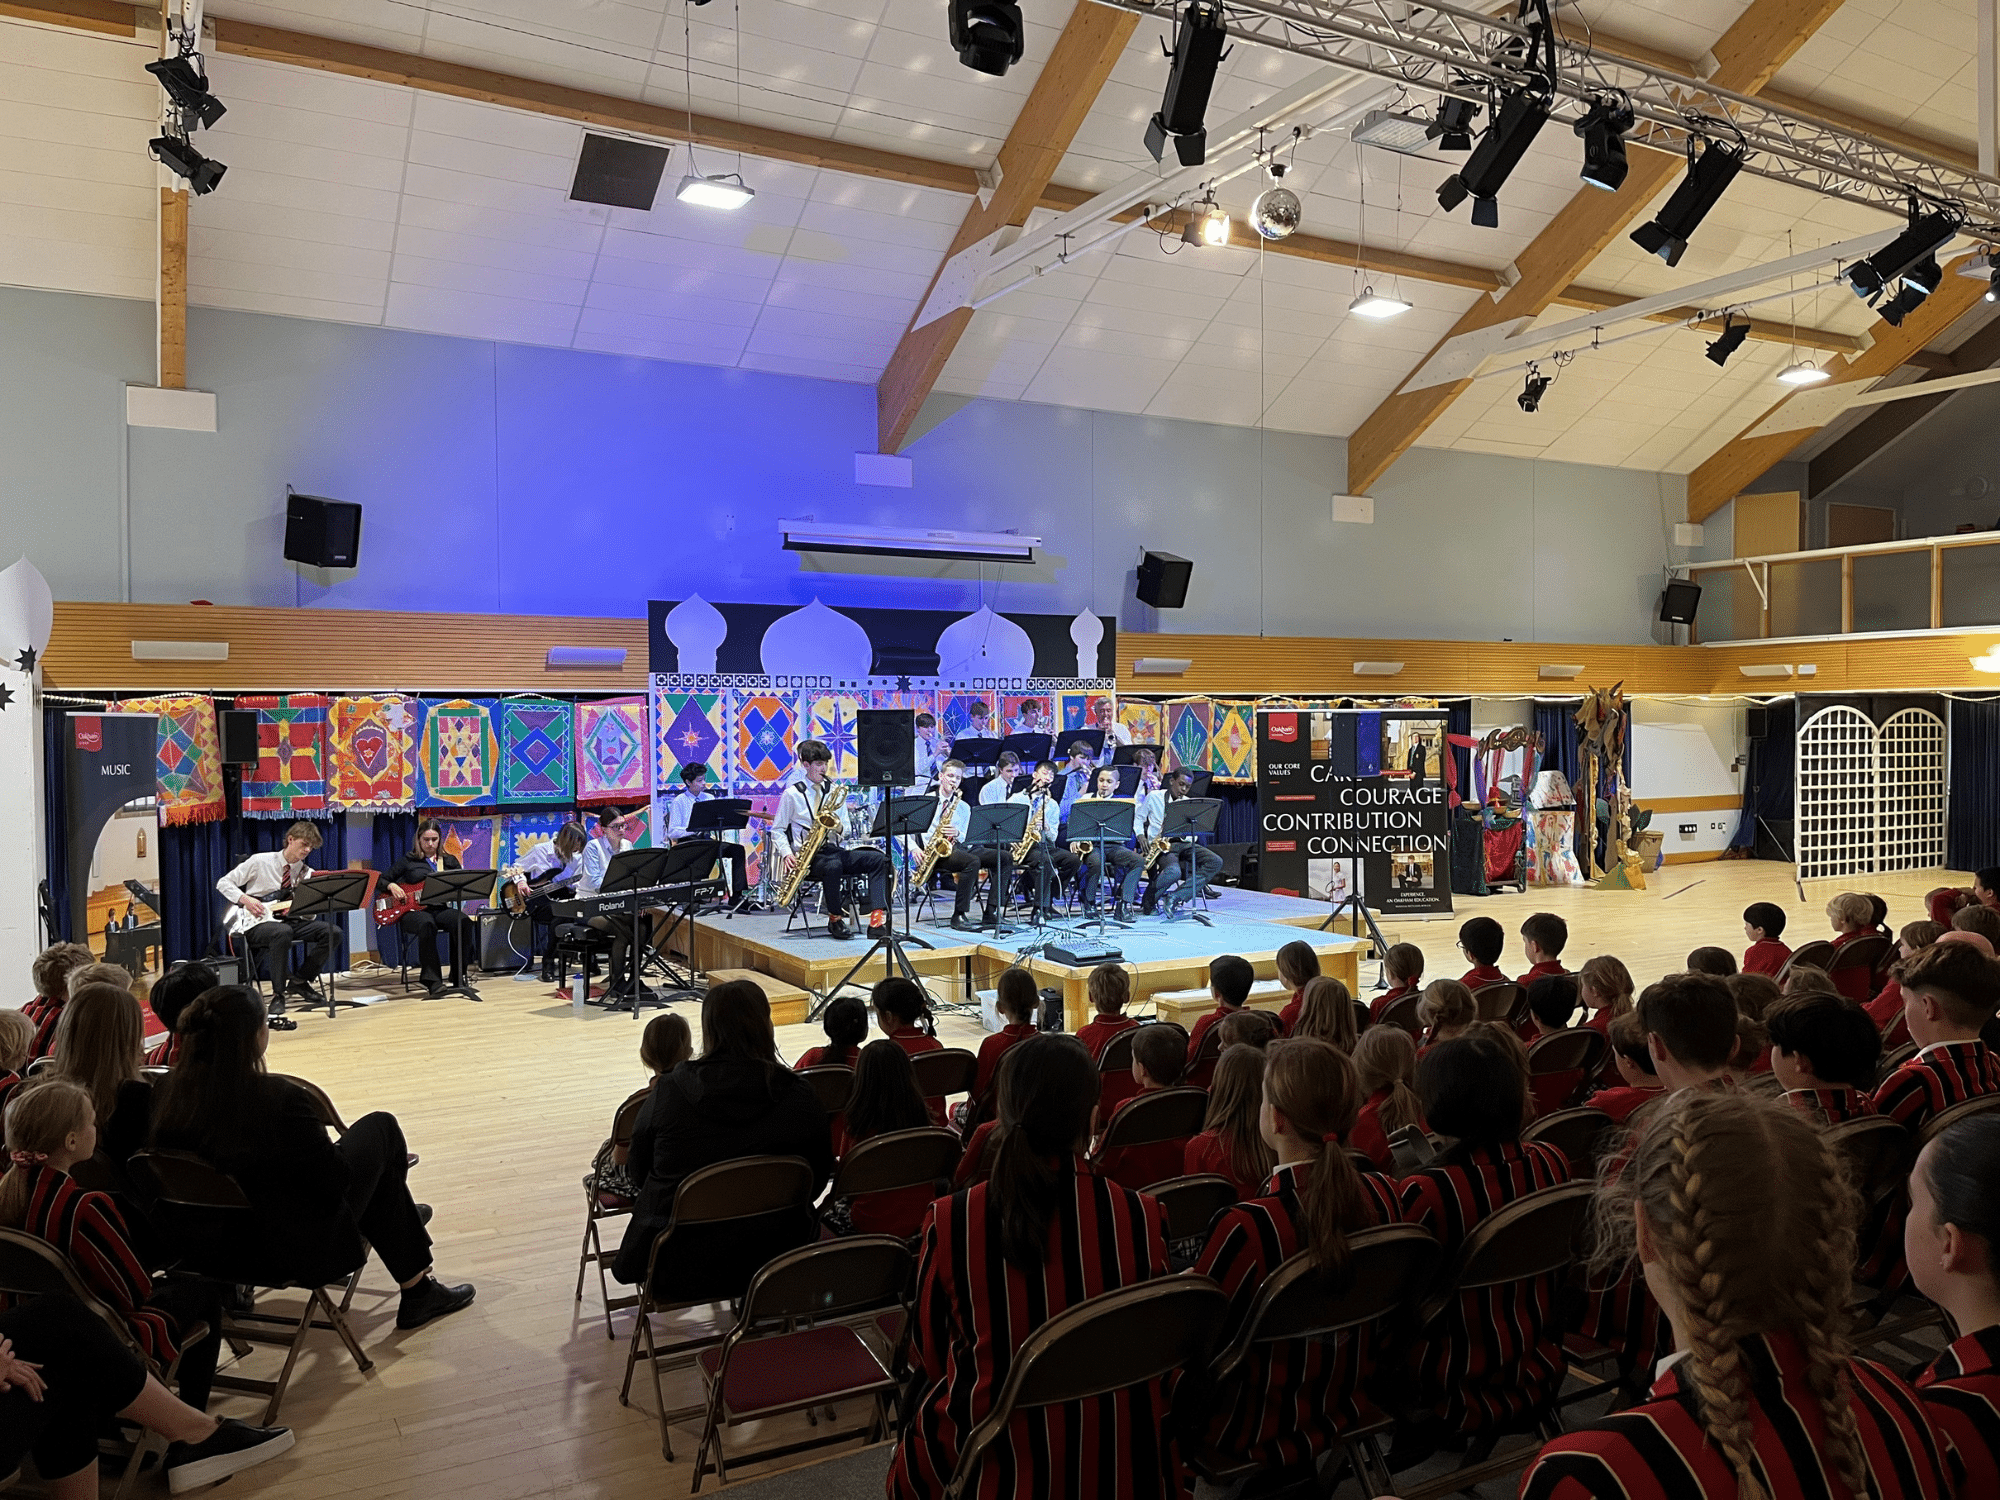 School big band perform on stage to listening students